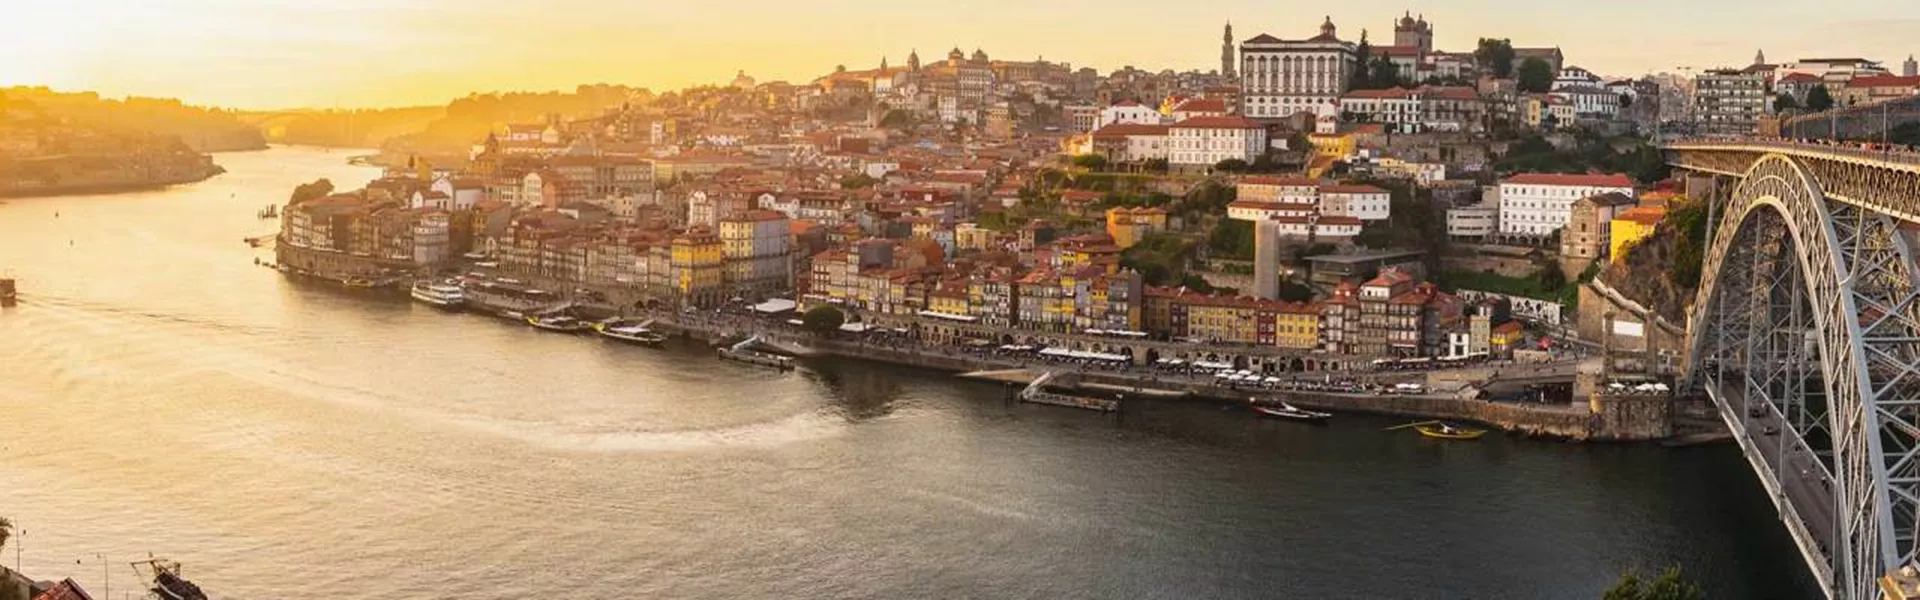 View on sunset at Porto, Portugal